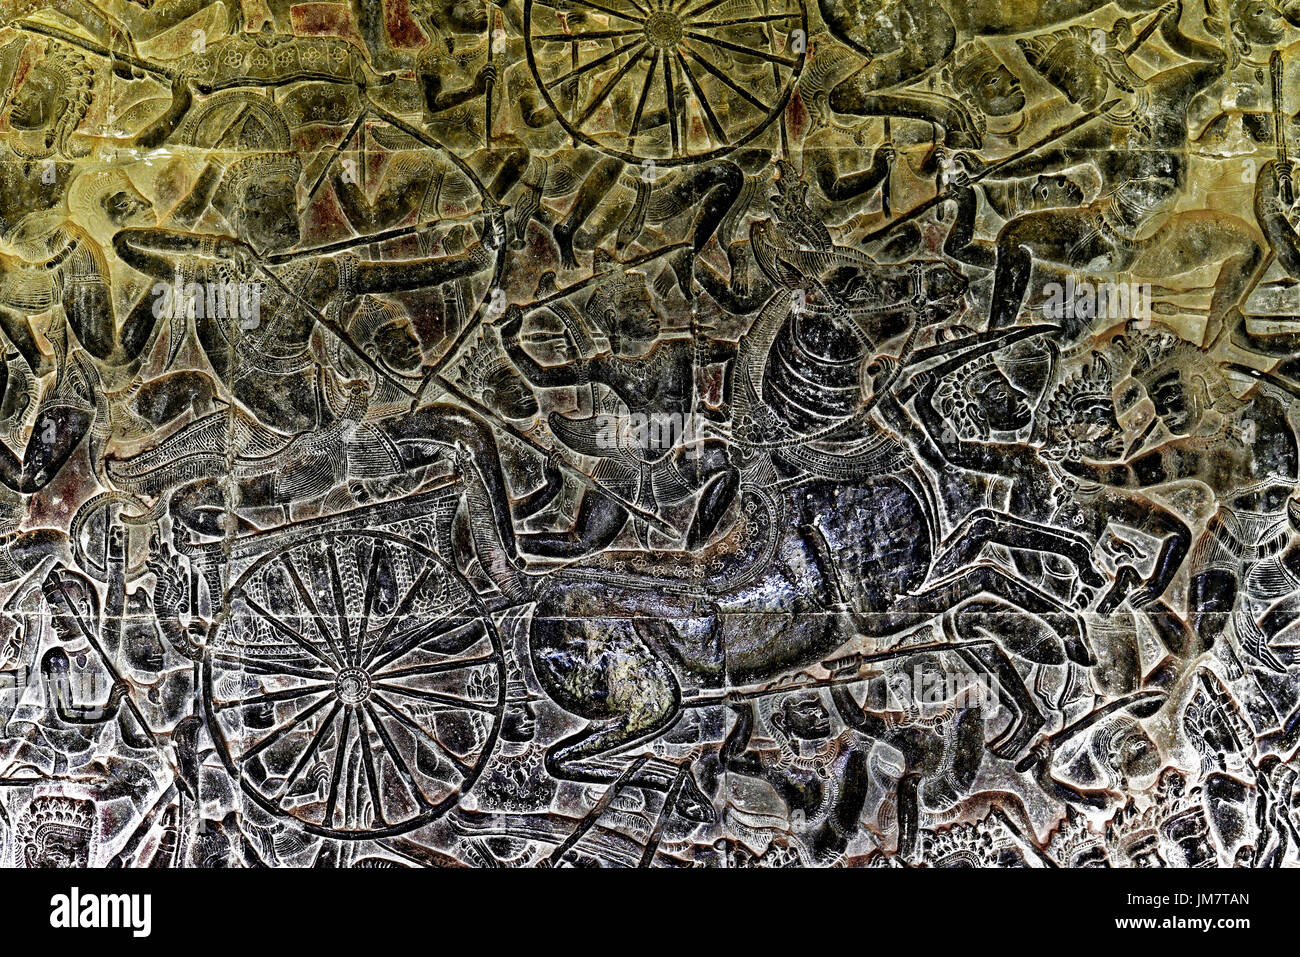 Cambodia Angkor Wat internal temple complex wall carving Khmer warriors and archers chariots and horses in battle Stock Photo